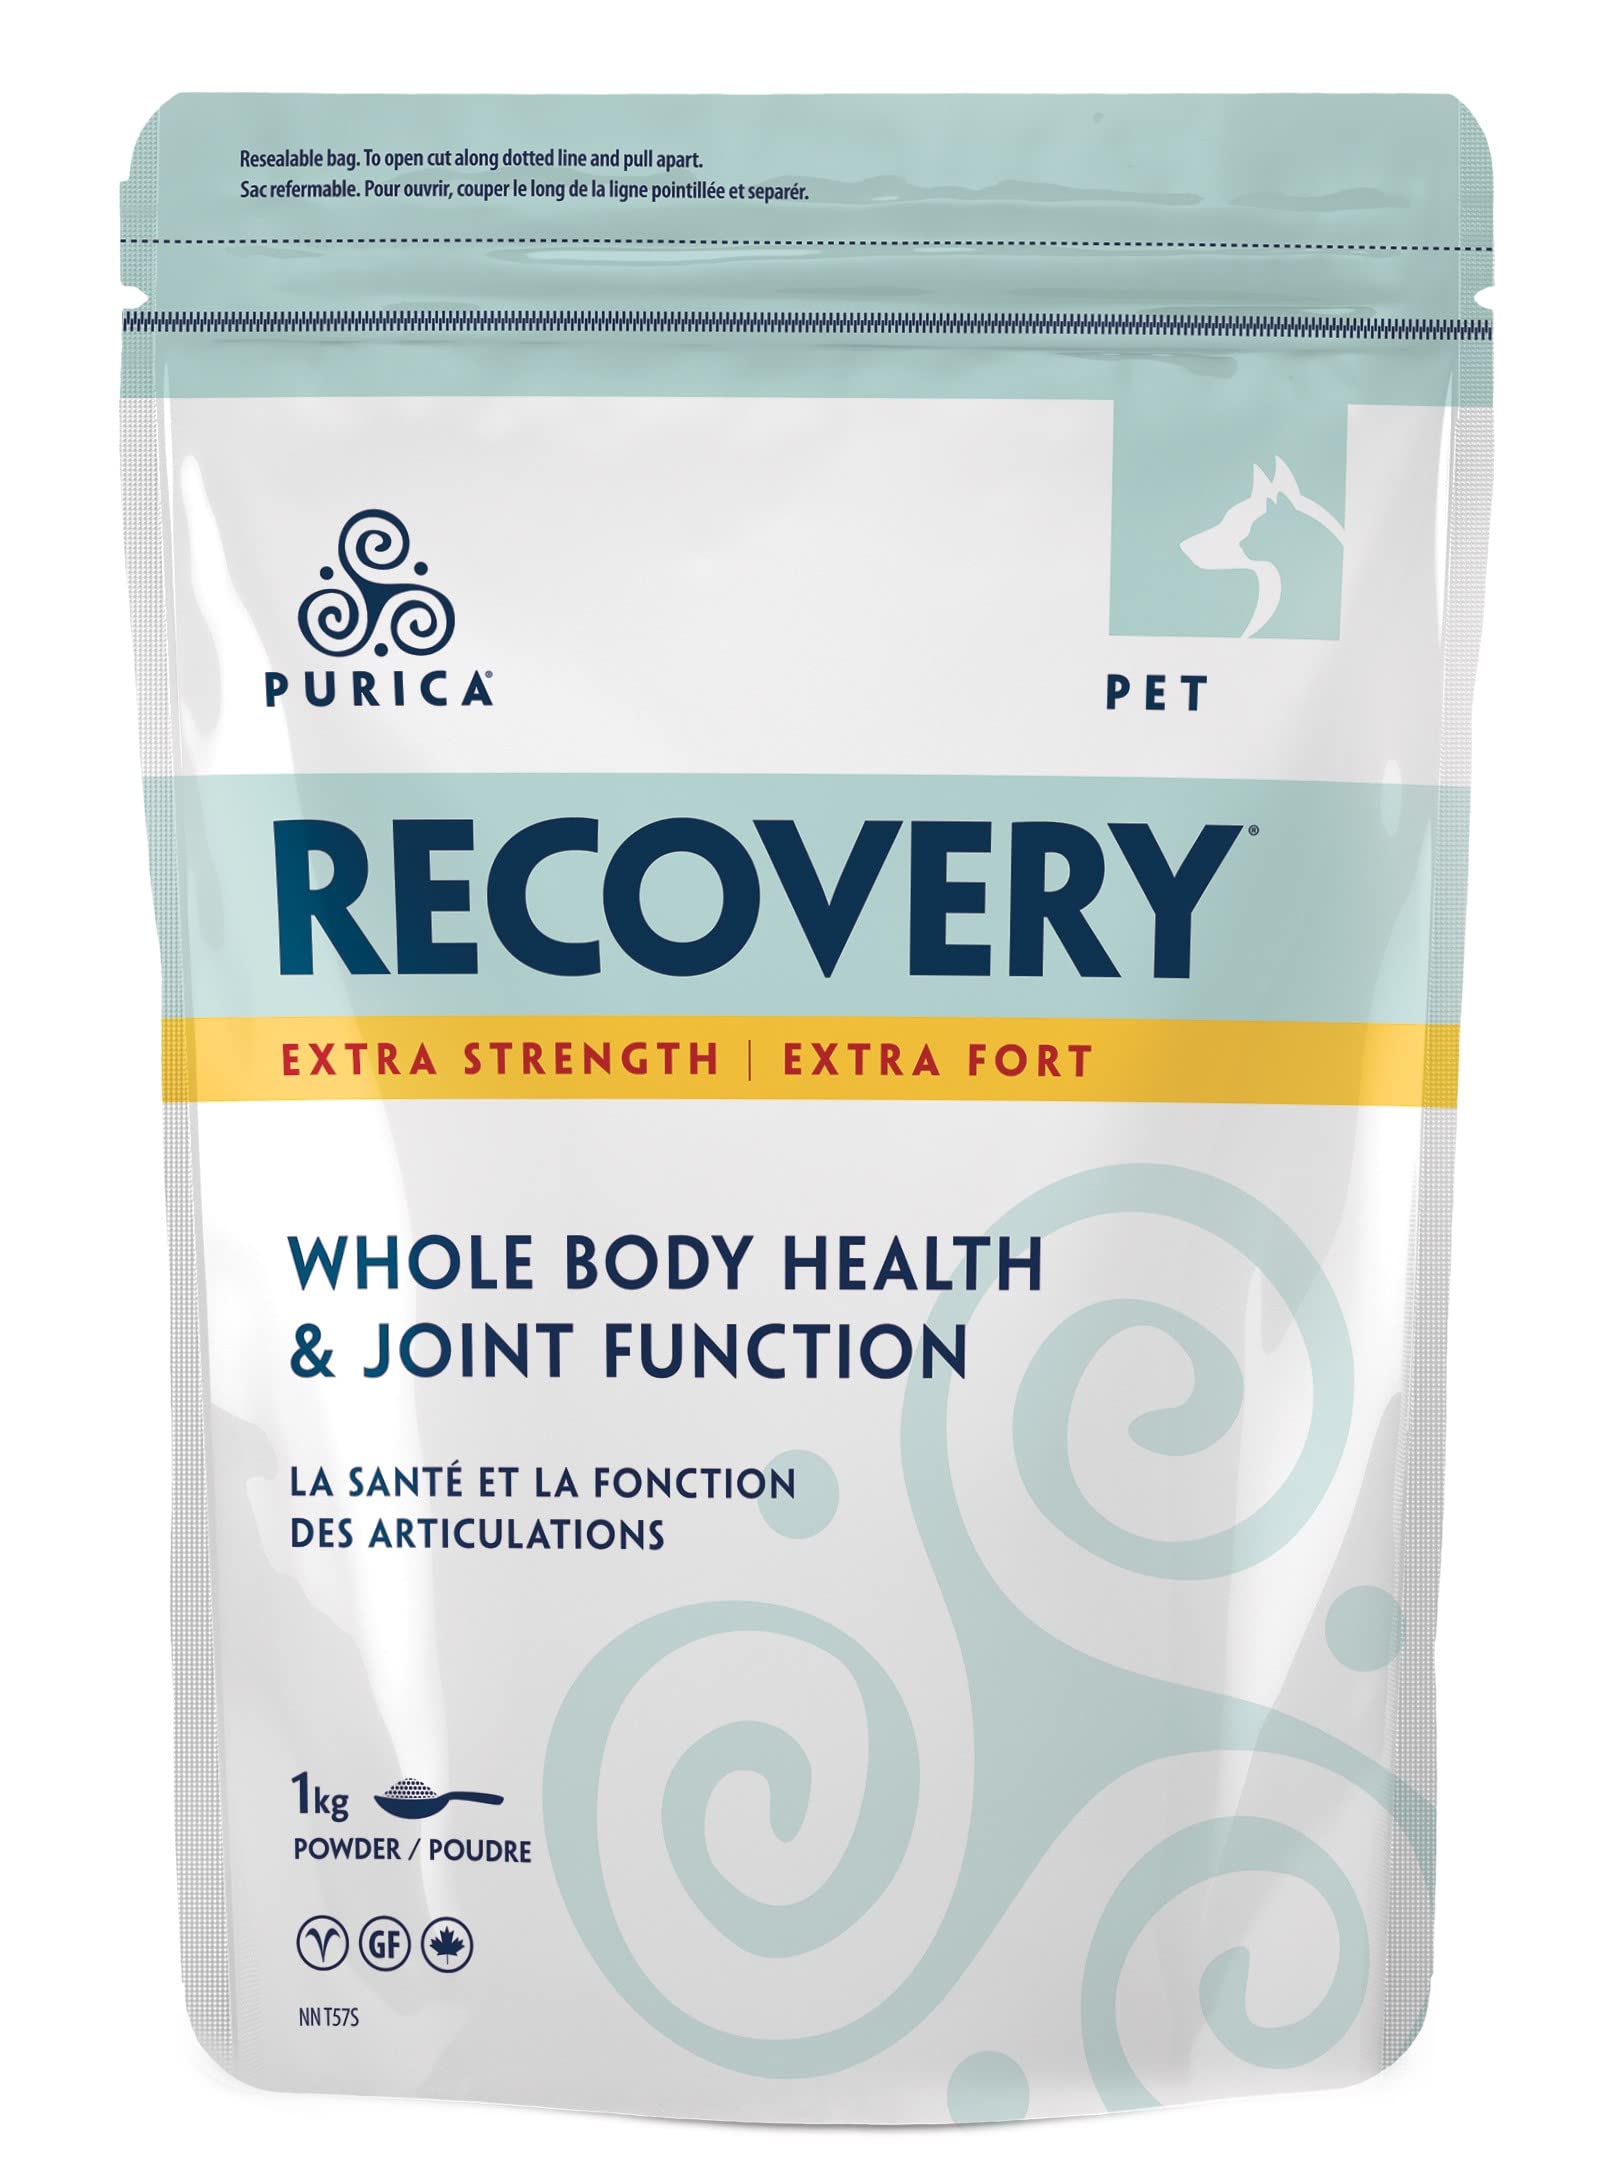 Purica Pet Recovery Extra Strength for Dogs - 2.2 lbs. (1Kg)